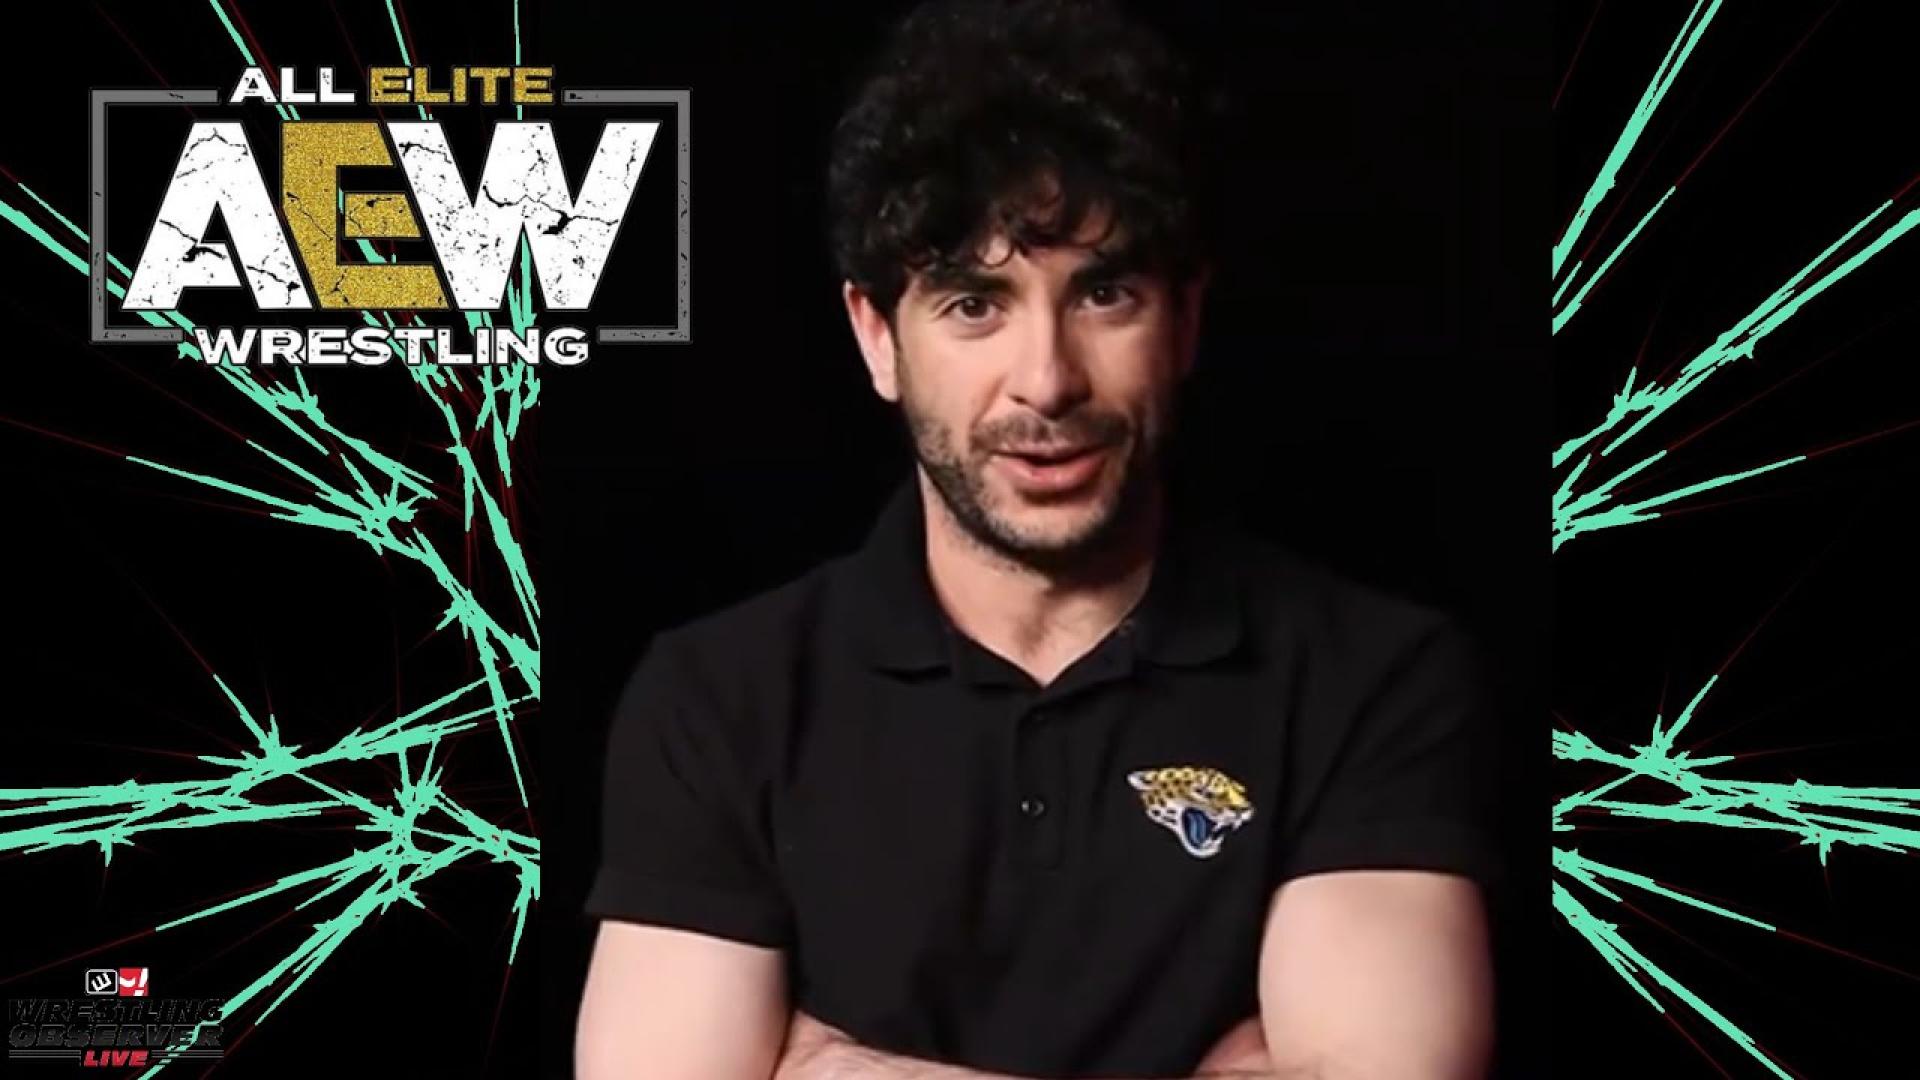 Tony Khan Discusses the Anticipated and Exciting Segment Featuring The Young Bucks Playing All In Footage